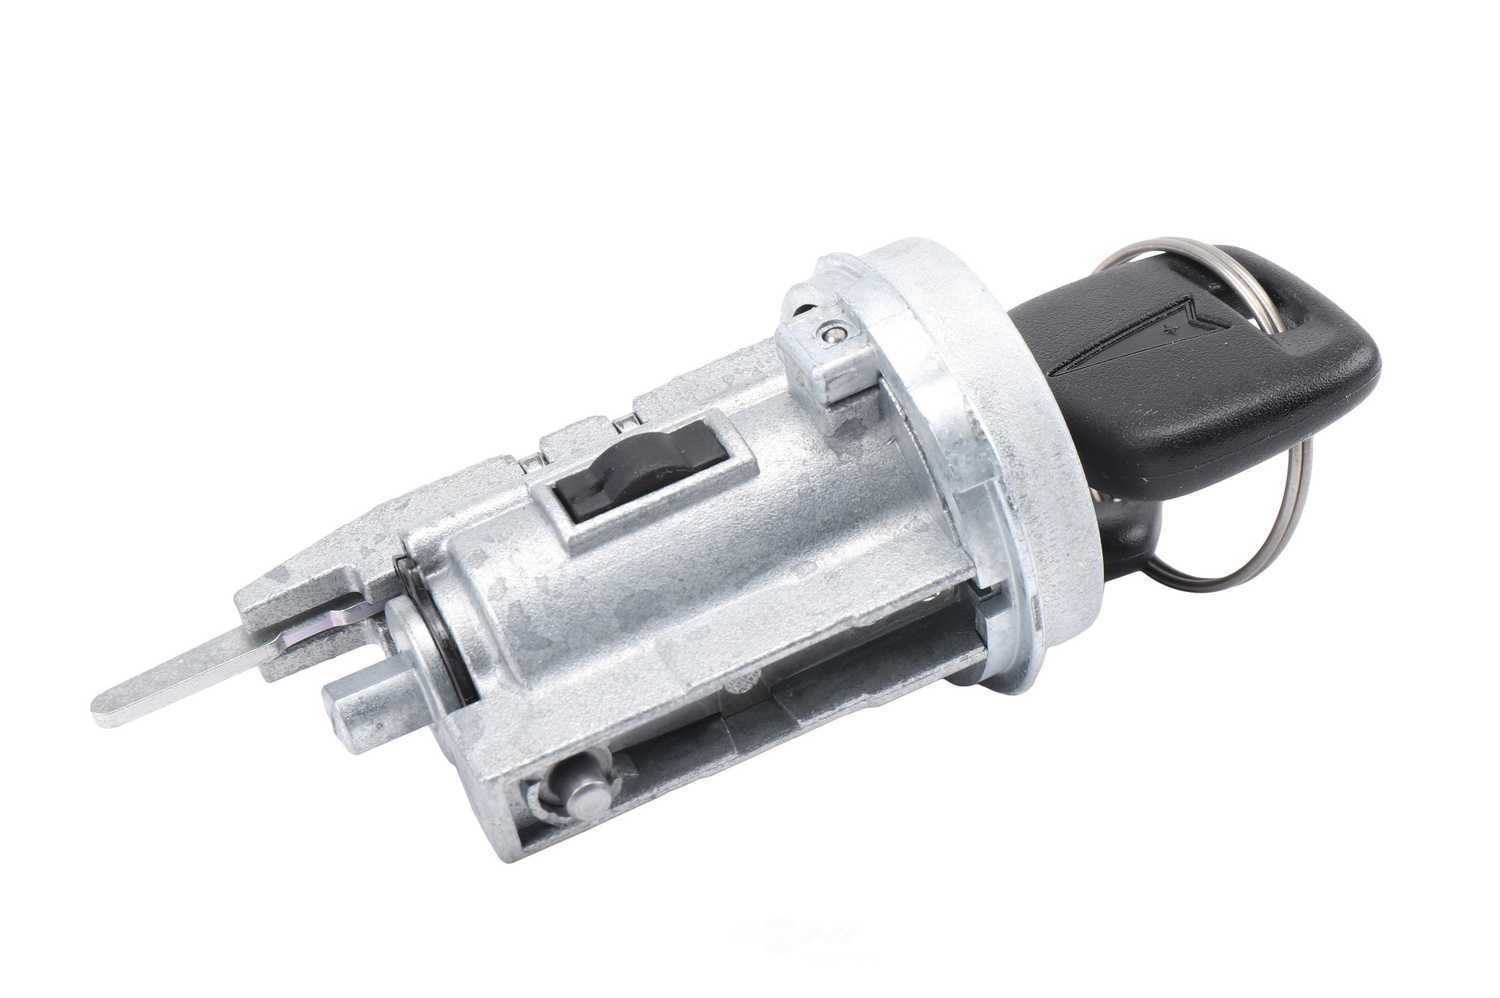 GM GENUINE PARTS - Ignition Lock Cylinder - GMP D1452E